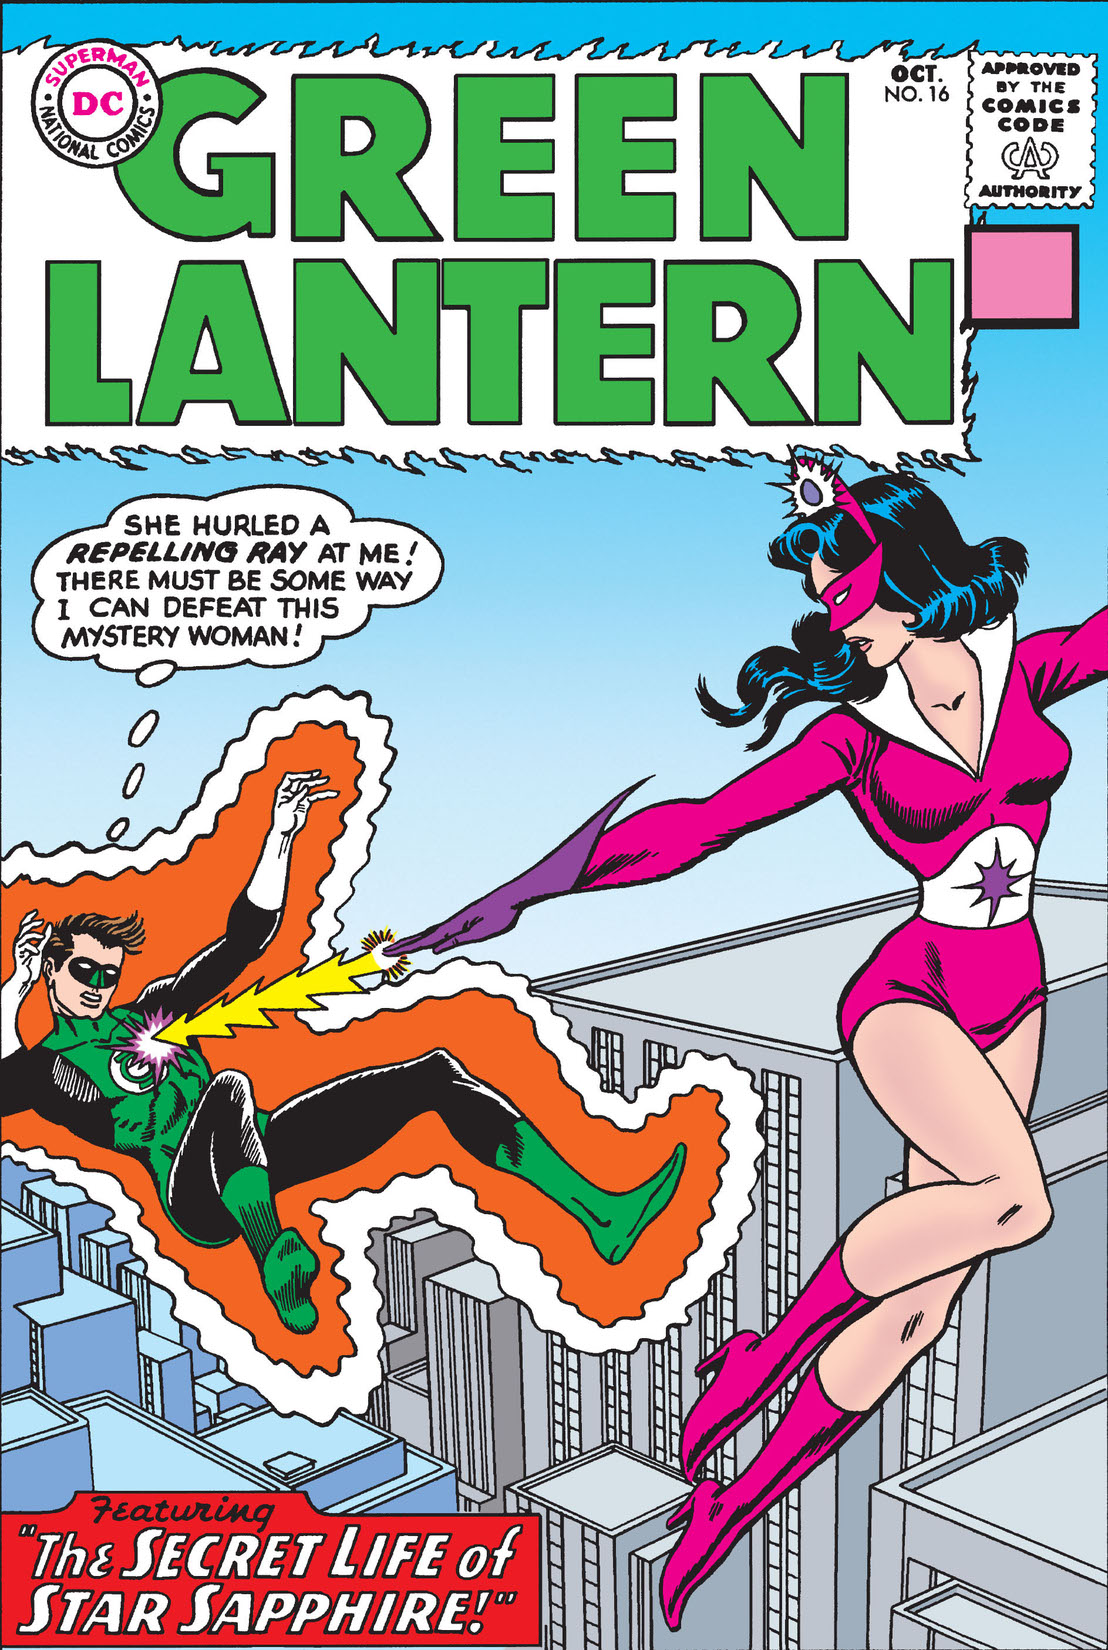 Green Lantern (1960-) #16 preview images